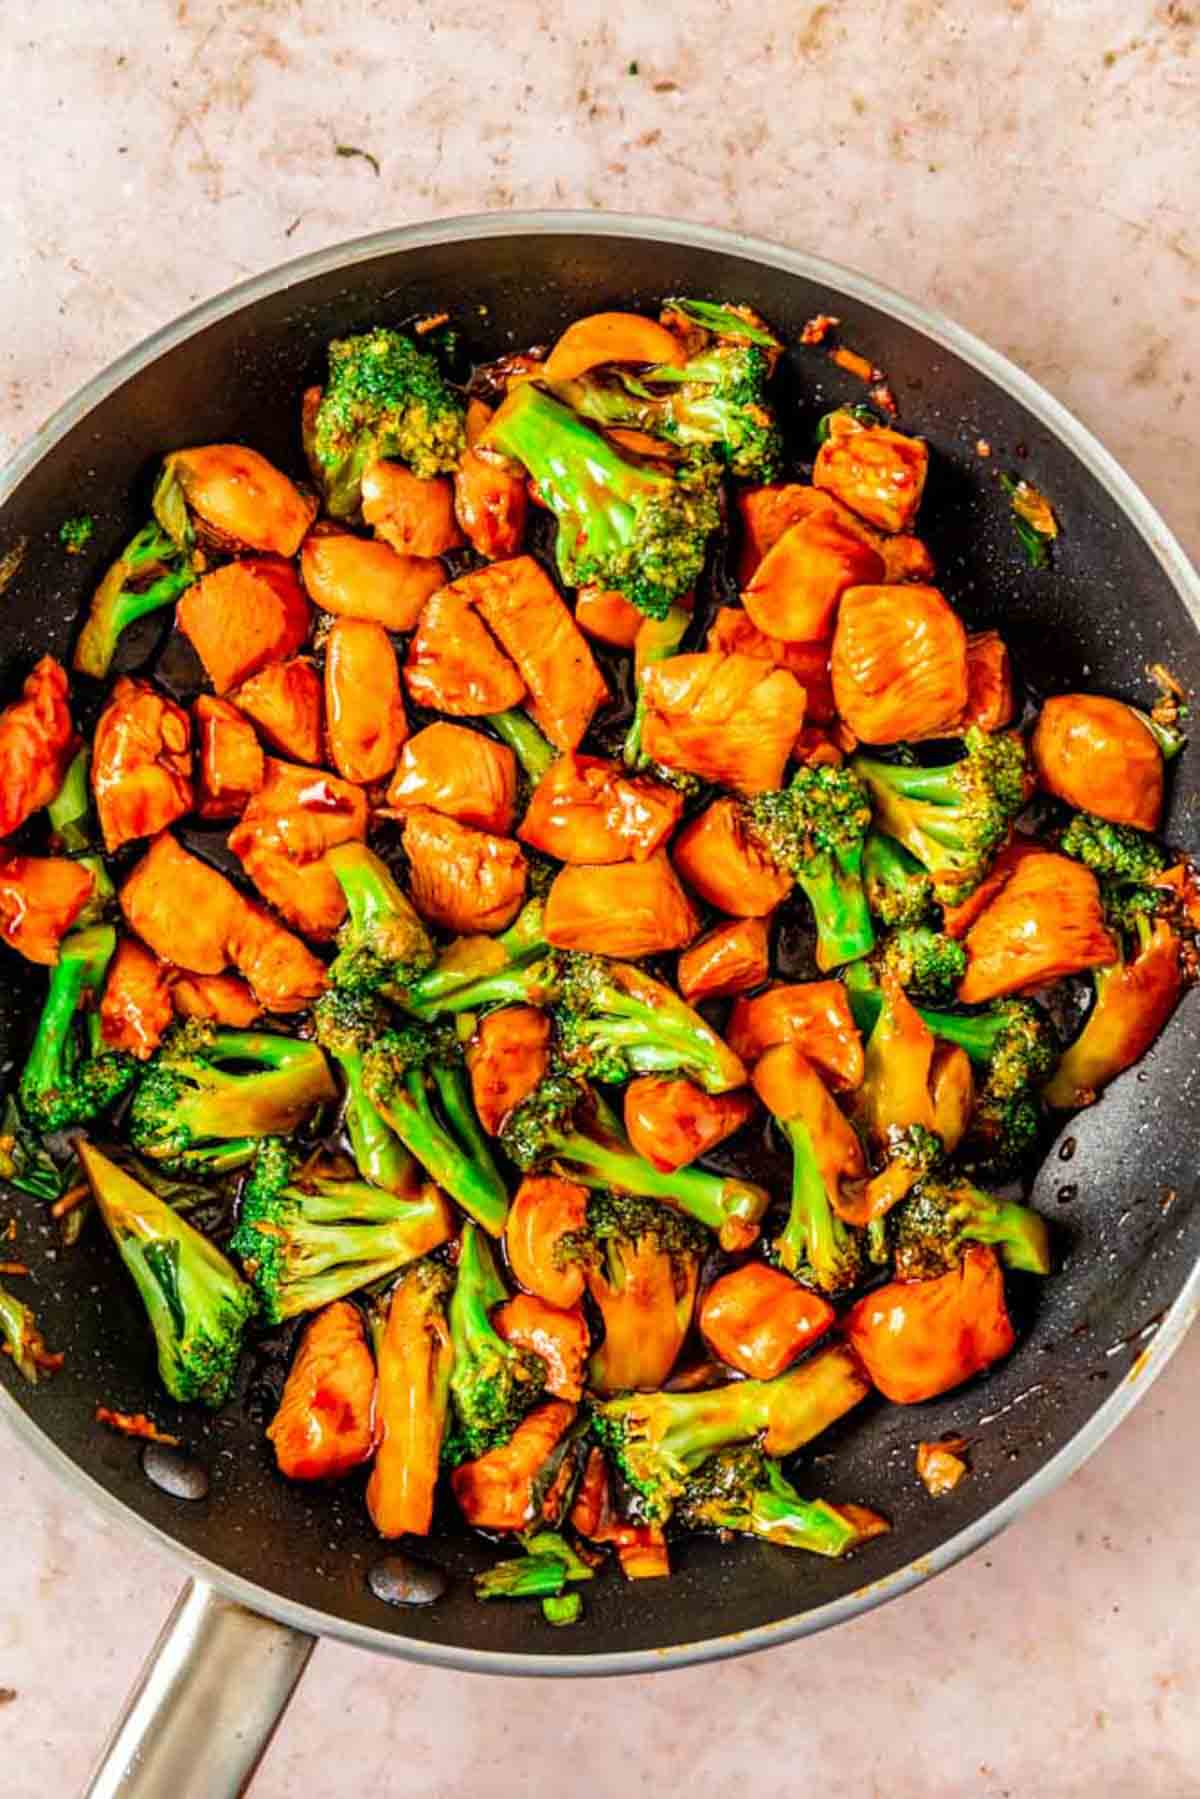 Chicken teriyaki with broccoli in a large skillet.